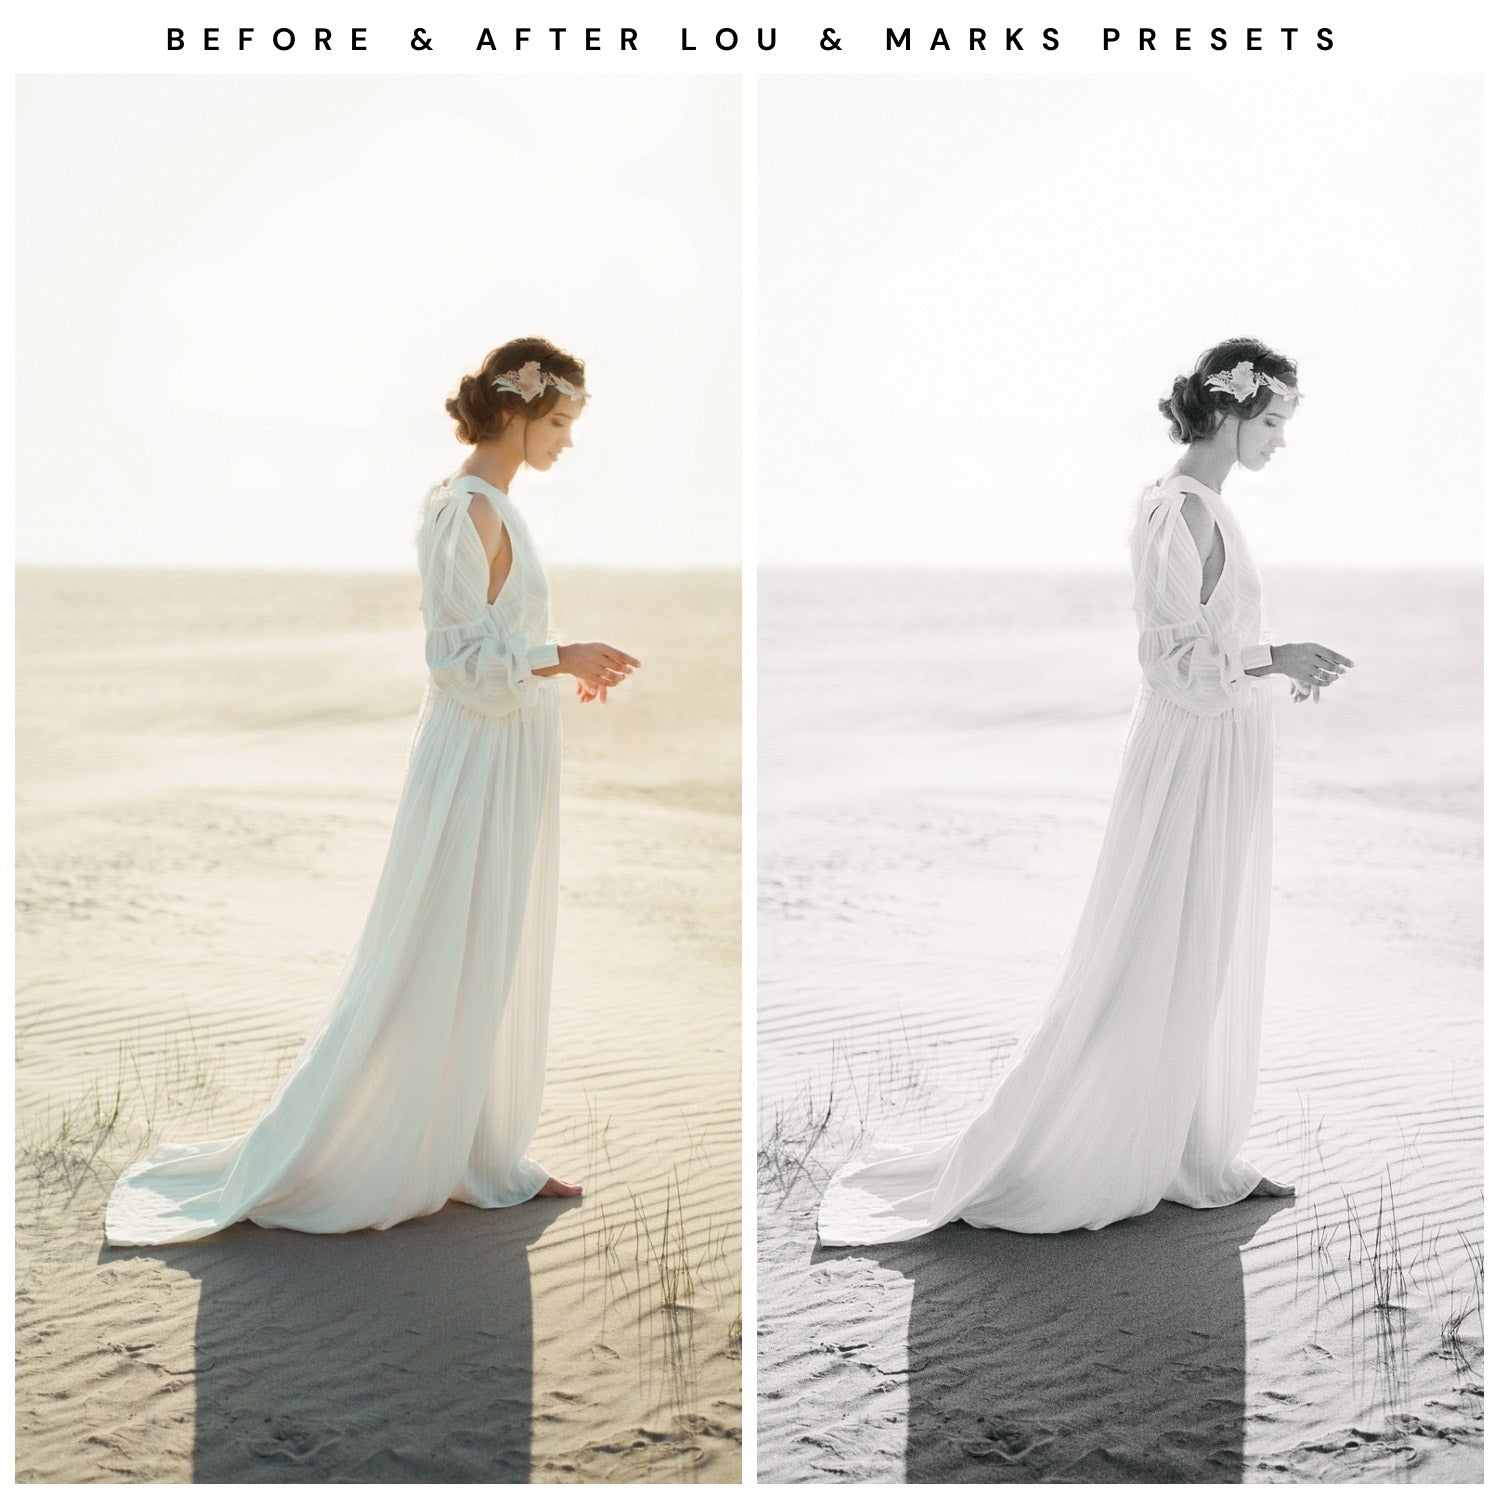 Lou & Marks Presets Light And Airy Lightroom Presets Bundle The Best Presets Black And White Portrait